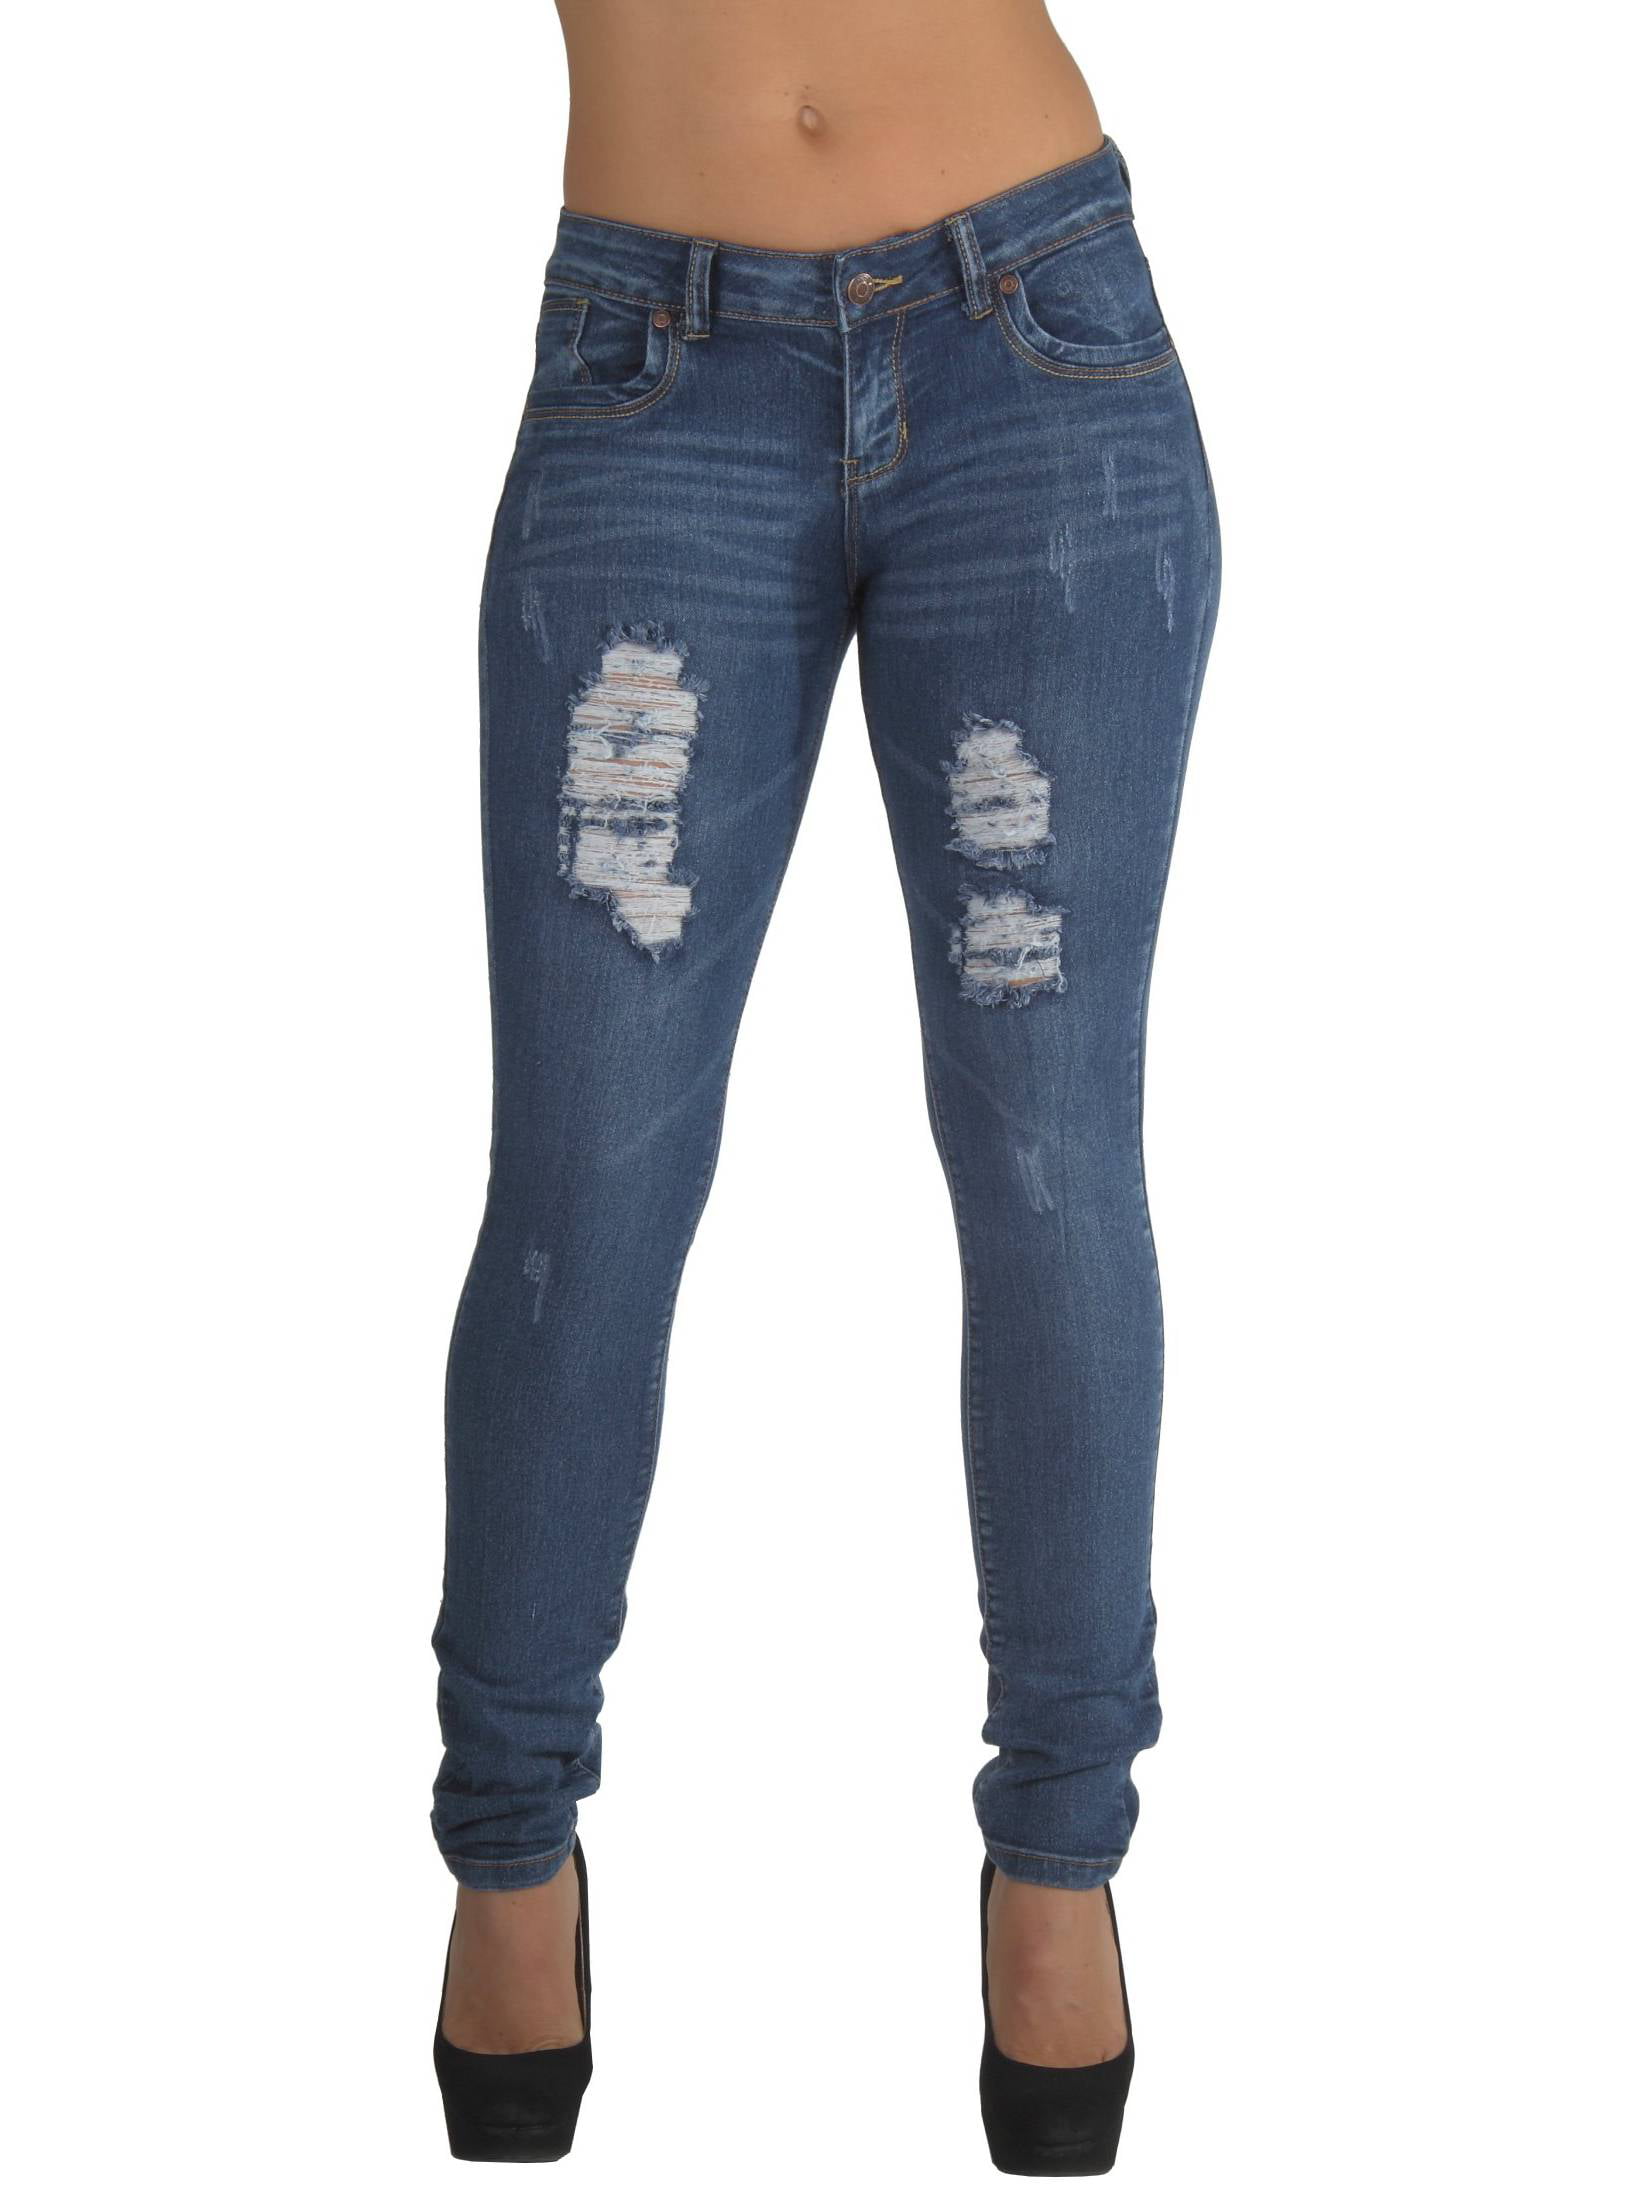 Fashion2love - Plus Size, Classic, Ripped Distressed, Destroyed Skinny ...